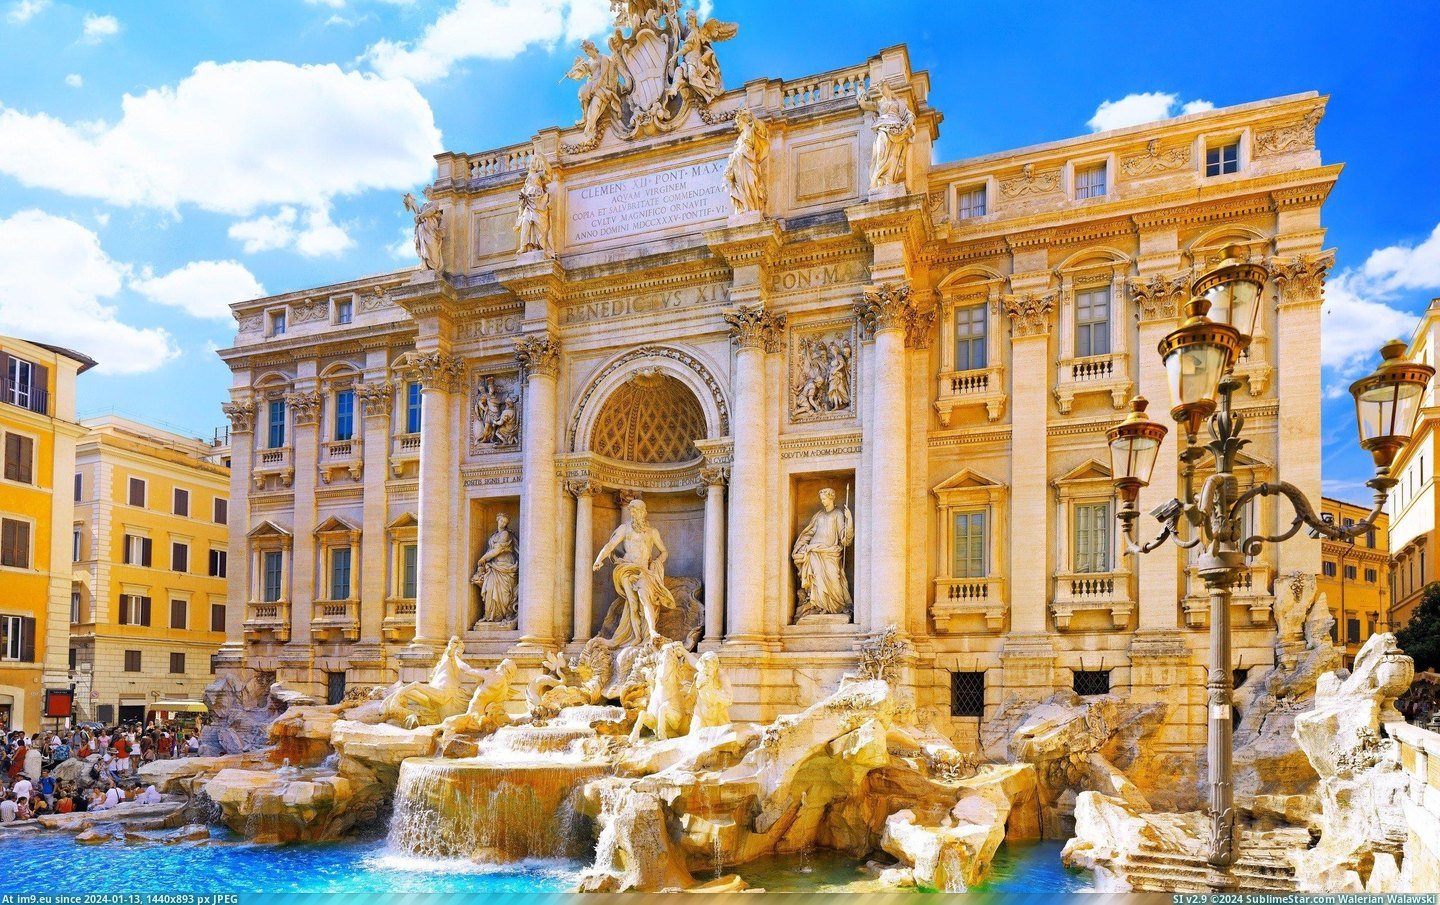 #Wallpaper #Wide #Fontana #Trevi #Italy #Rome Fontana Di Trevi Rome Italy Wide HD Wallpaper Pic. (Изображение из альбом Unique HD Wallpapers))